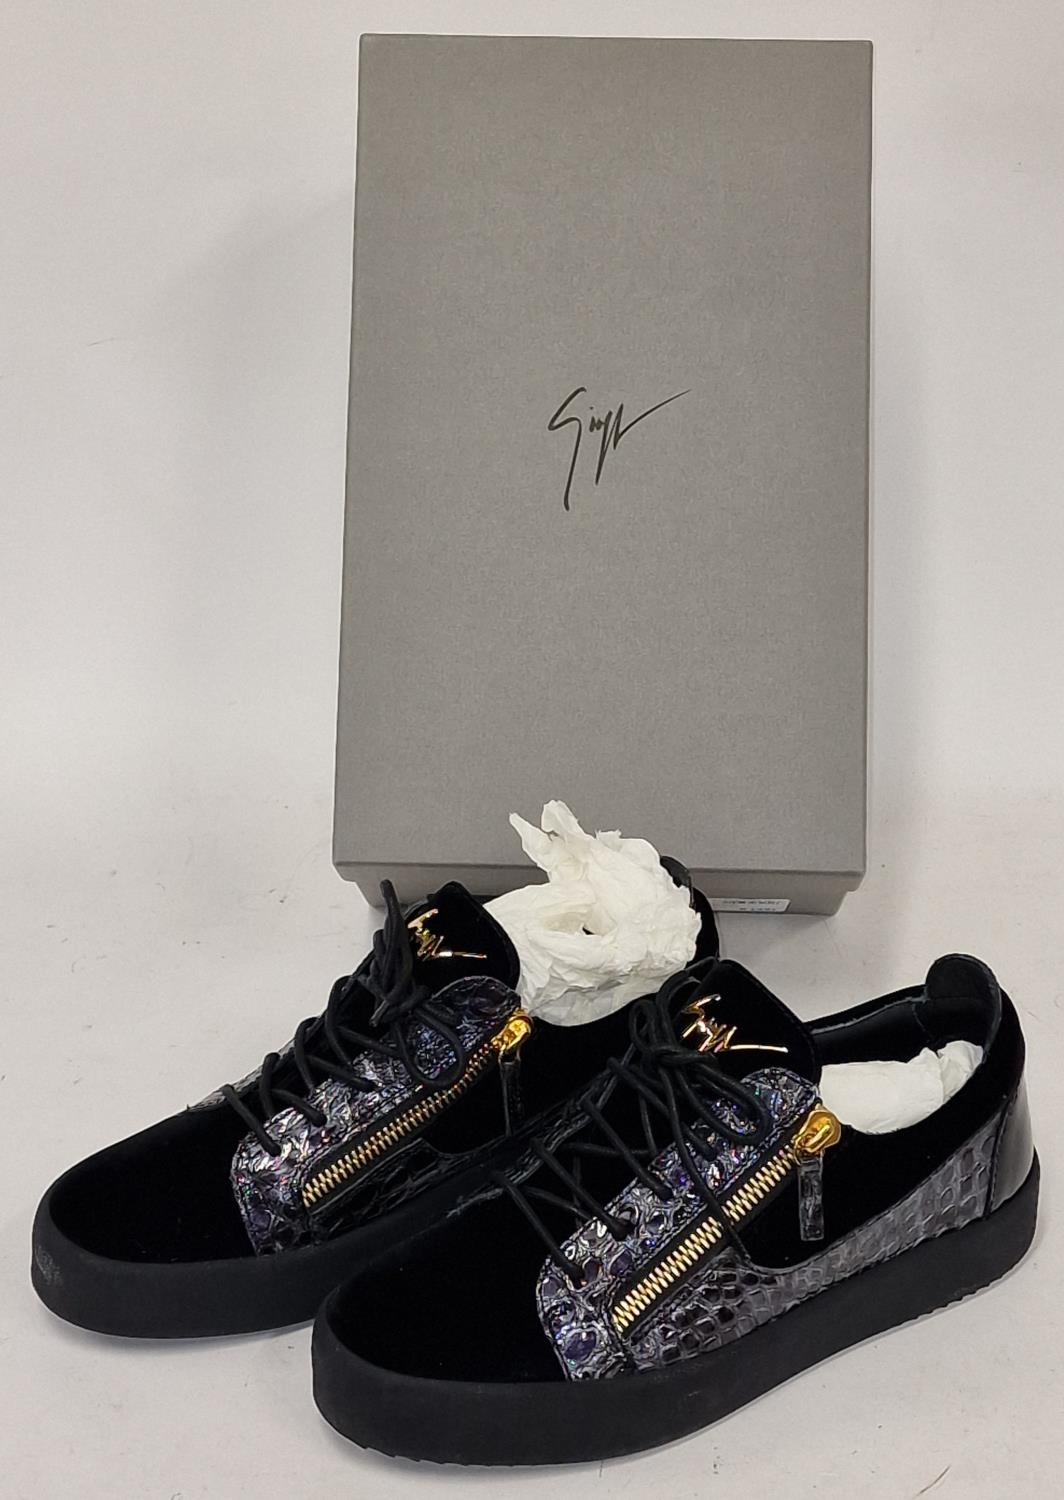 Pair of Giuseppe Zanotti designer trainers with box and dust bag size 8 (REF 111).